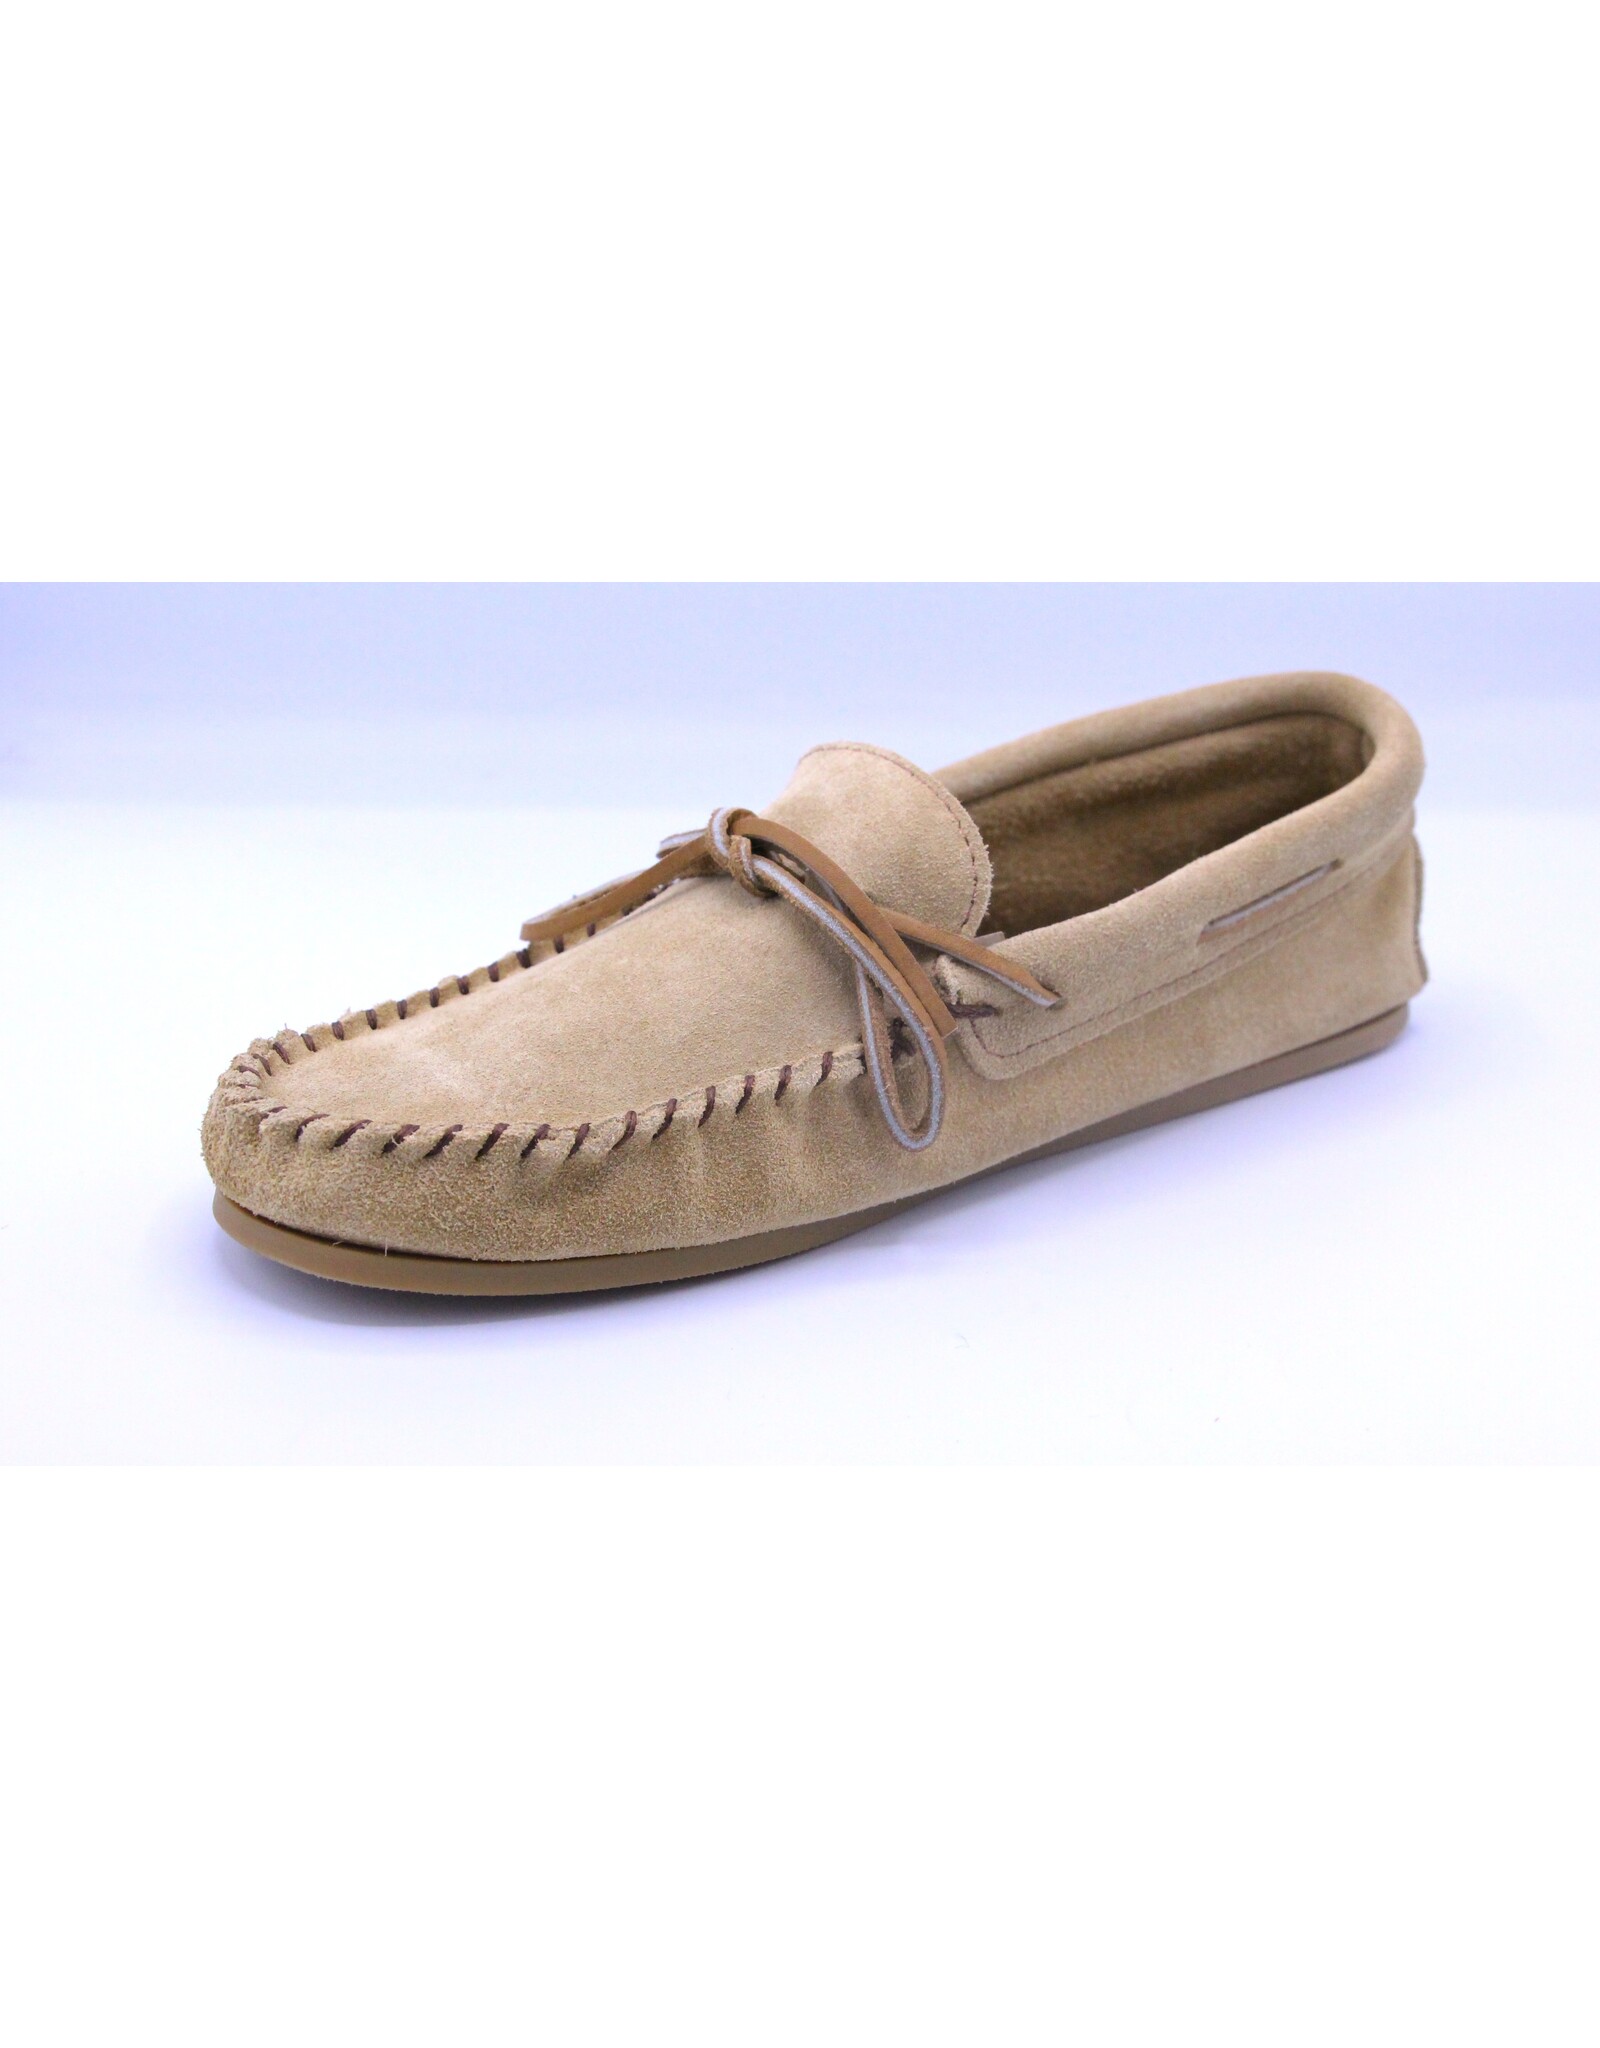 Moose Tan Moccasin with Sole Men - 13108MTM